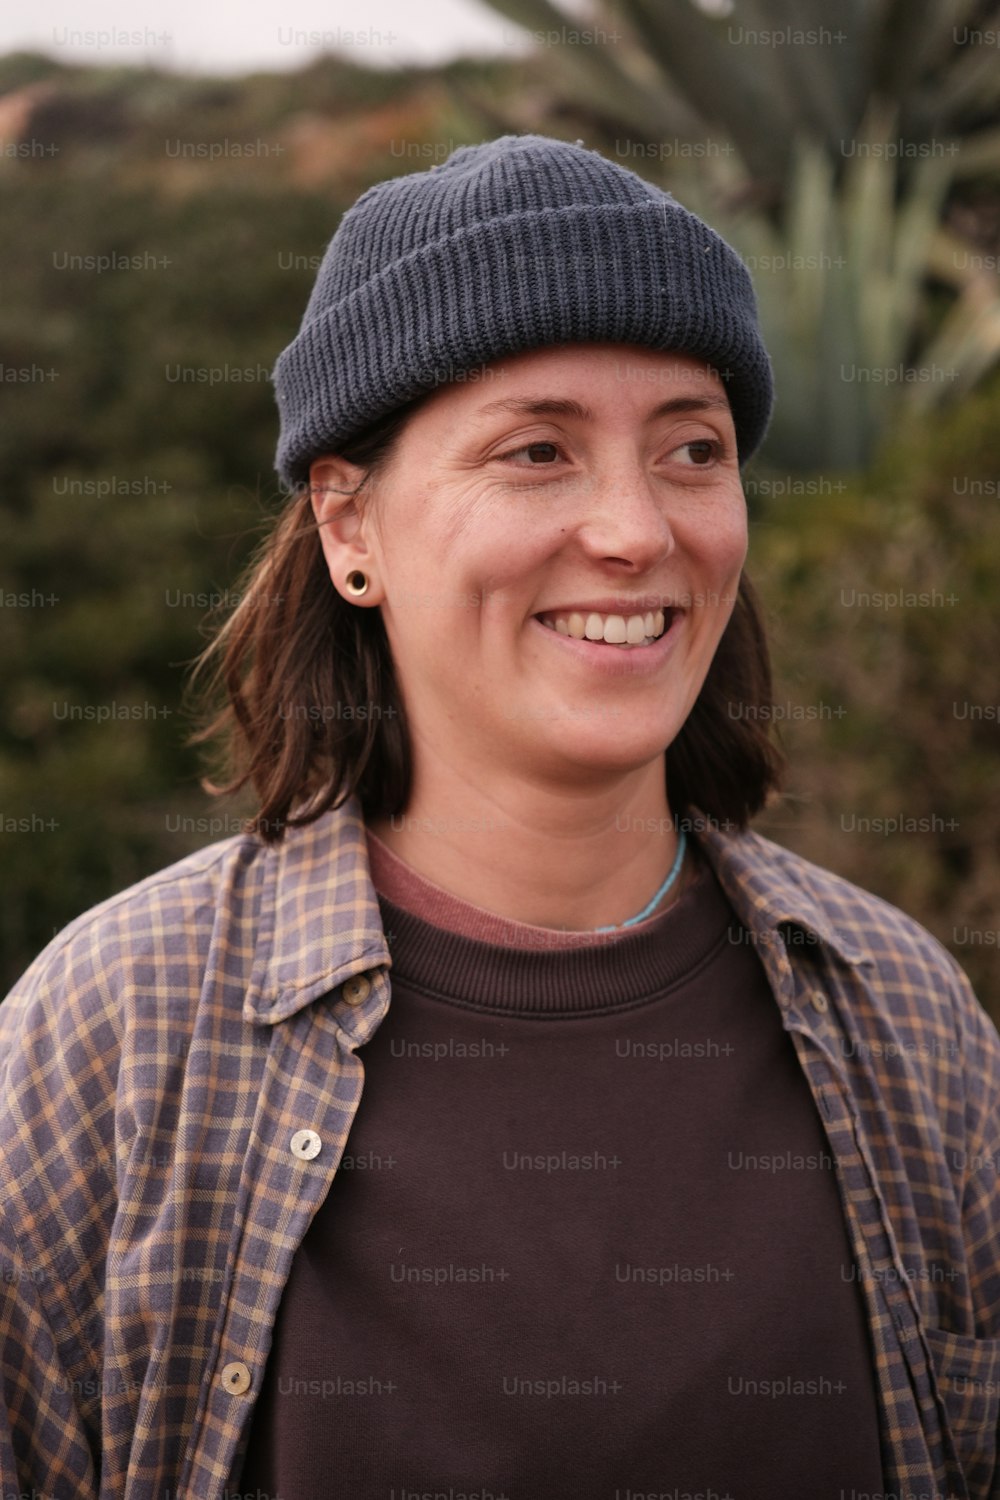 a woman wearing a hat and smiling for the camera